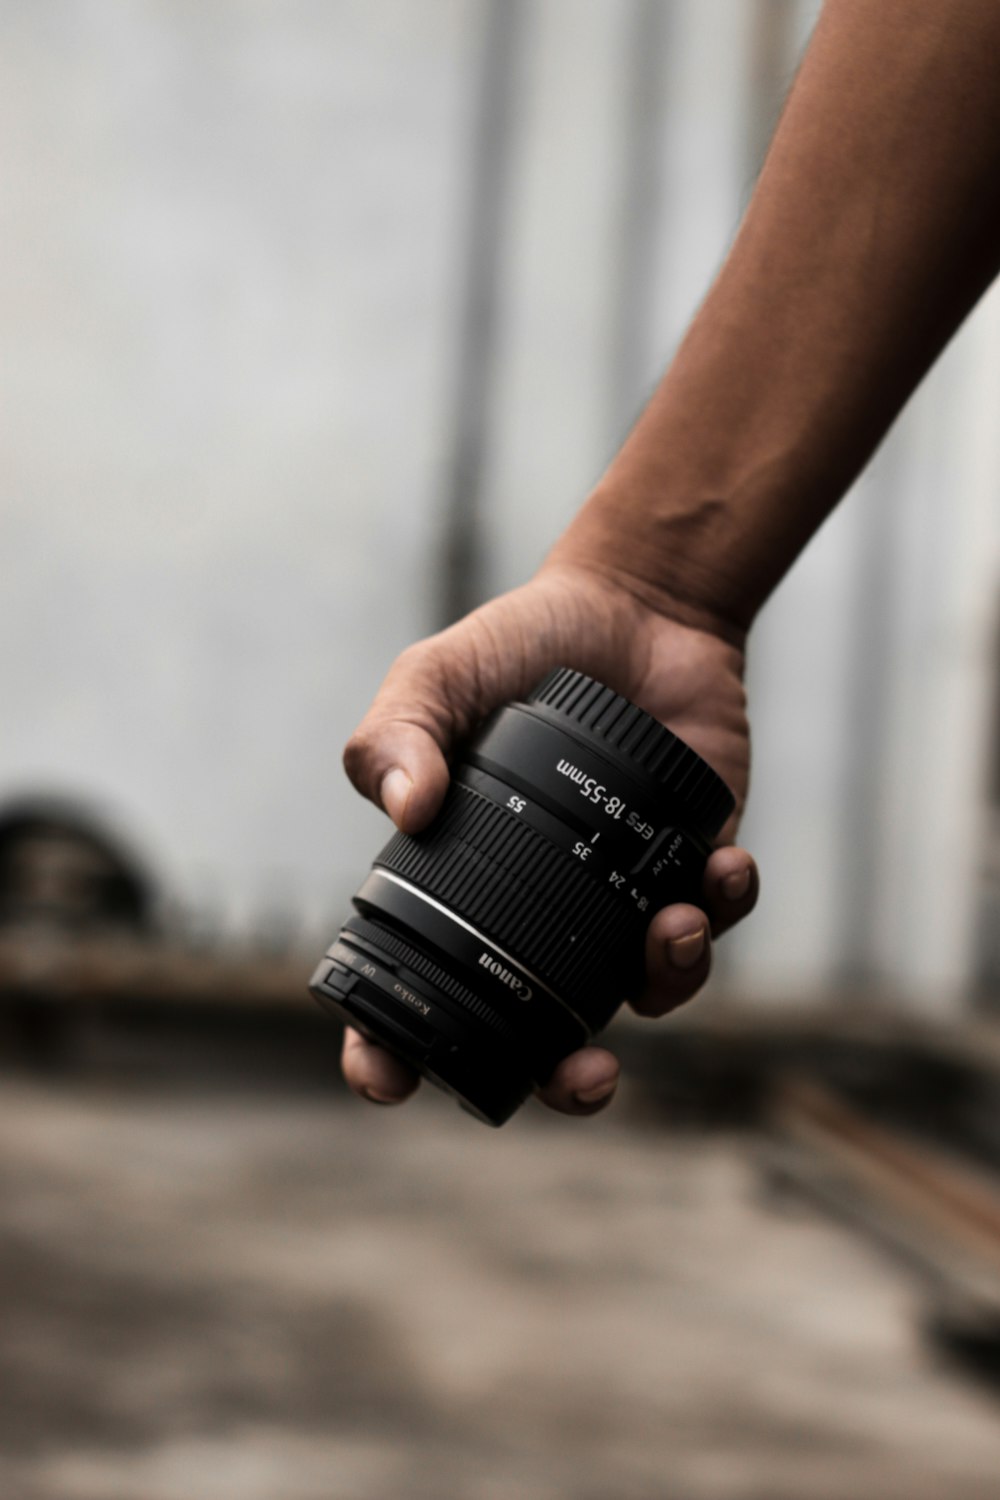 a person holding a camera lens in their hand